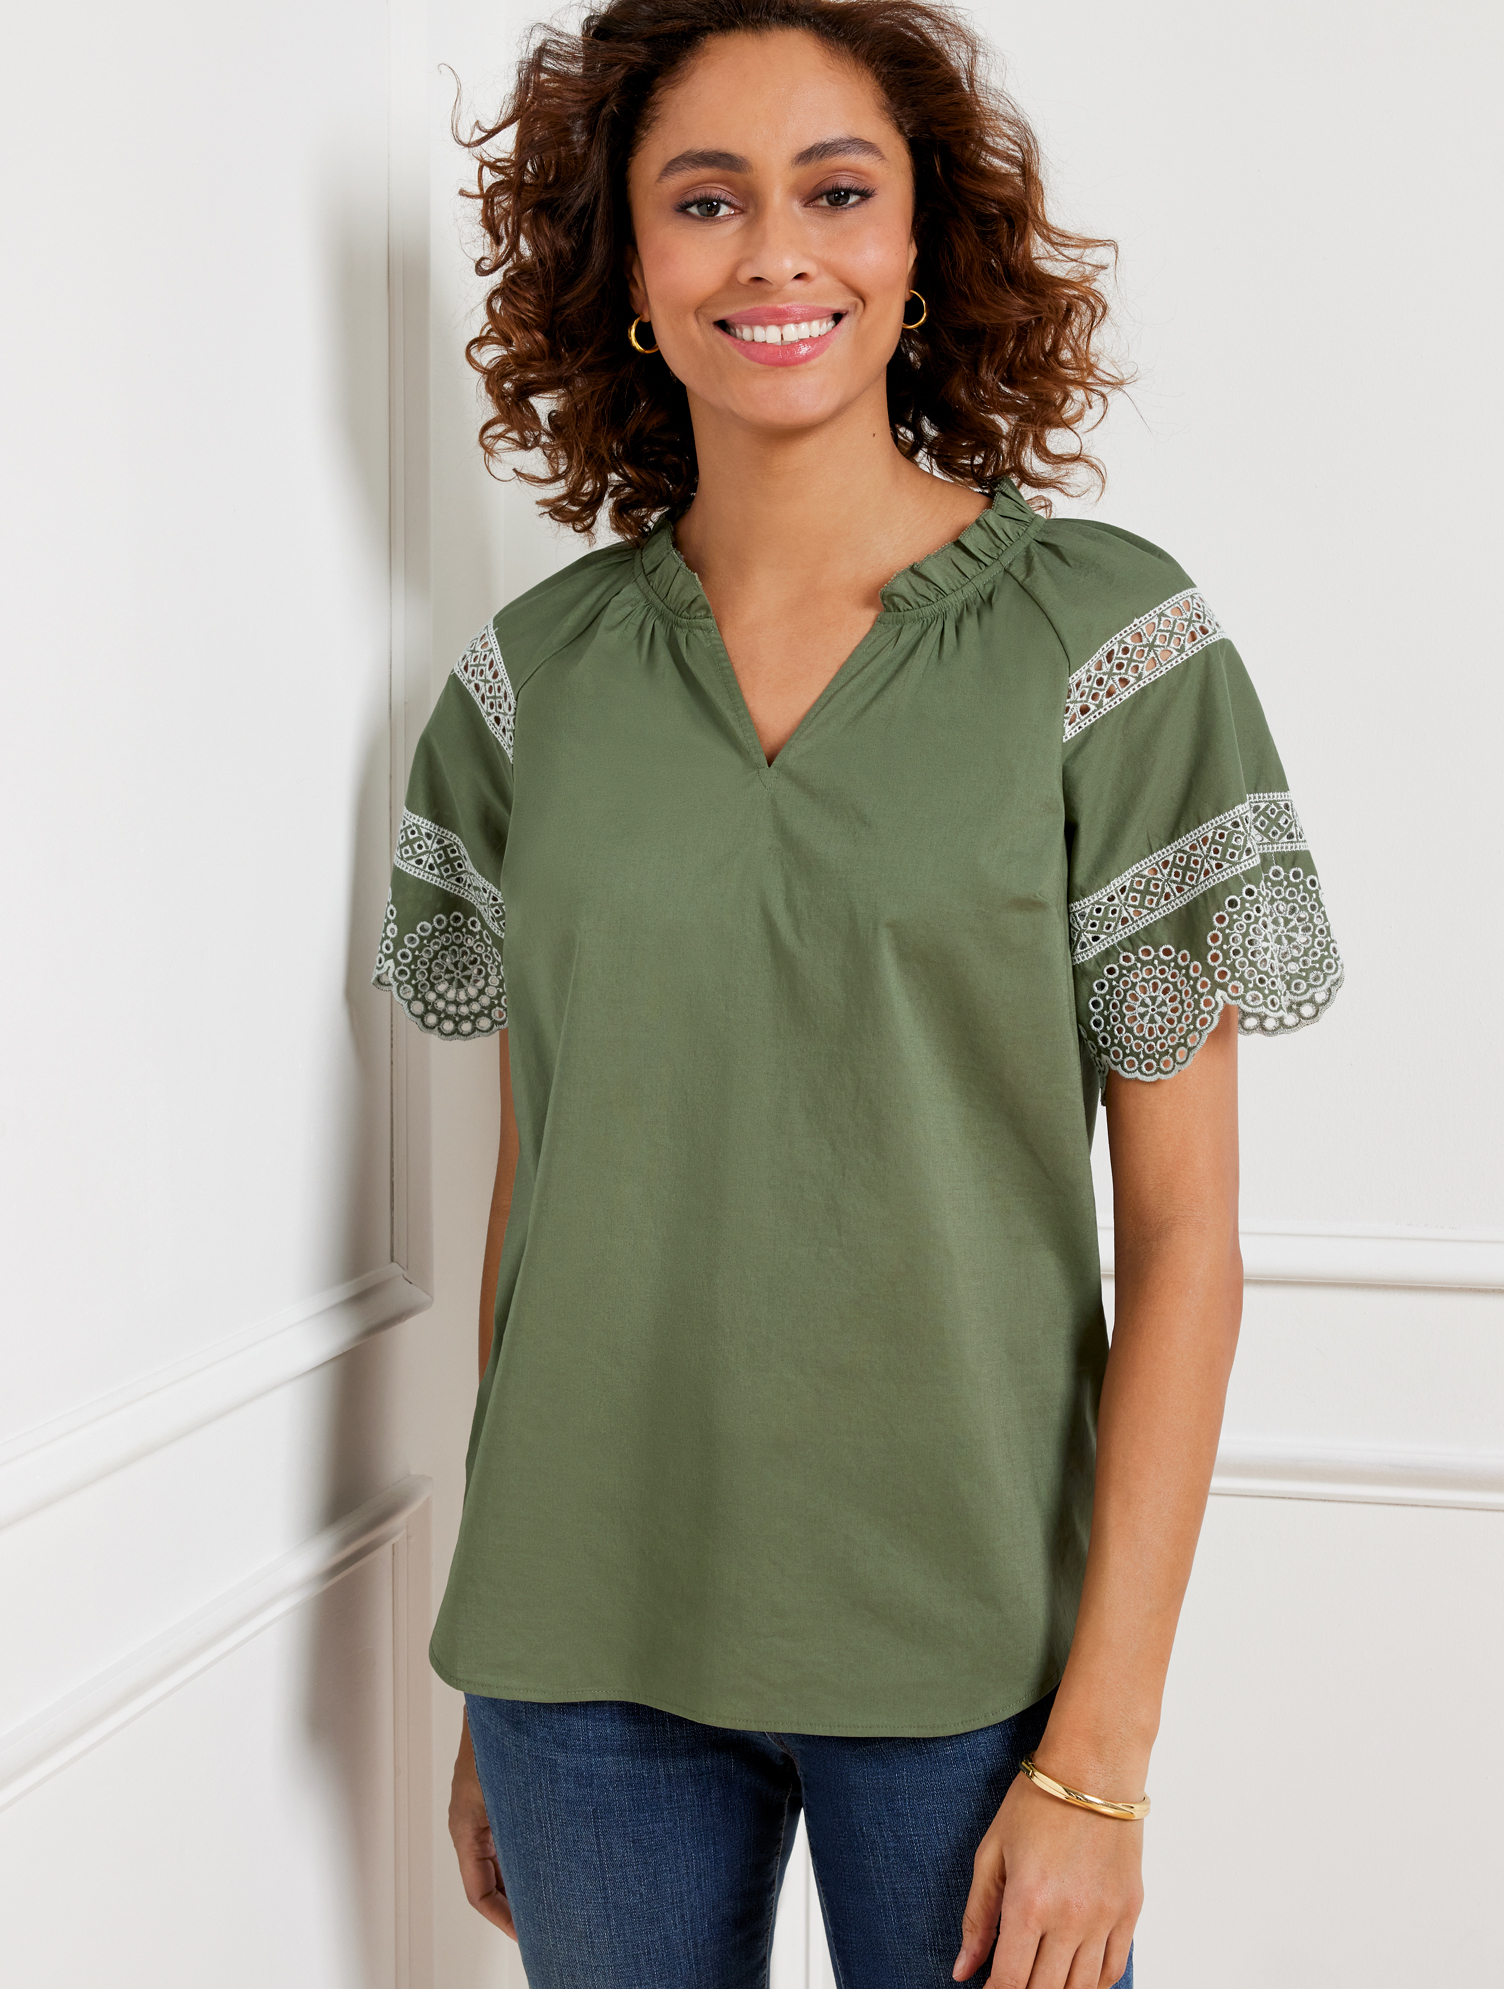 Talbots Embroidered Sleeve Top - Spring Moss - Xs - 100% Cotton